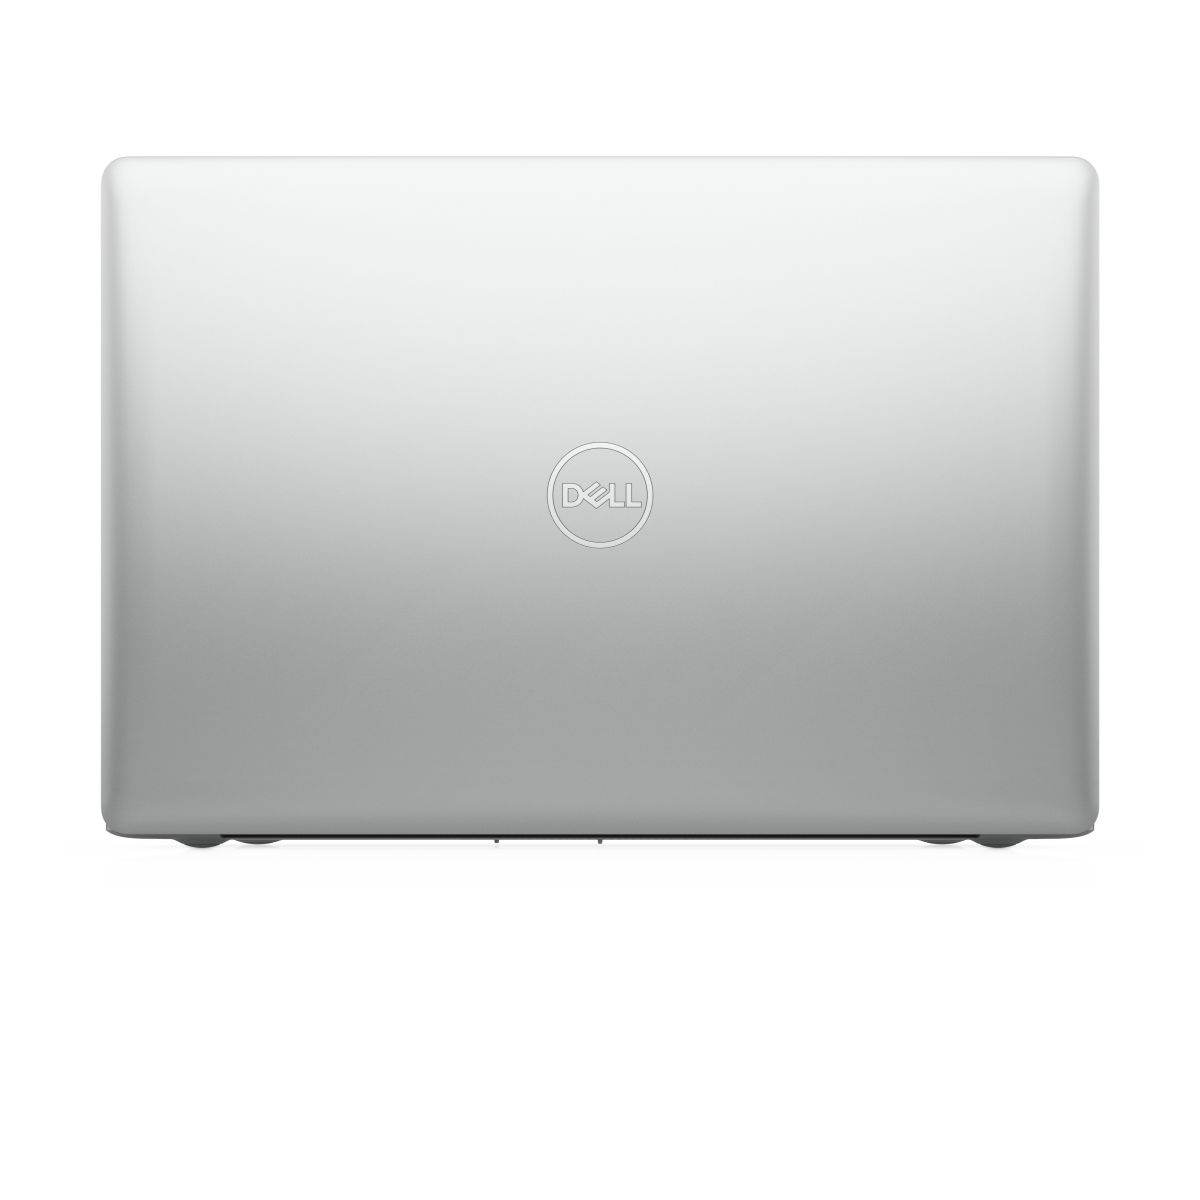 DELL Inspiron 3580 - 3580-4961 laptop specifications